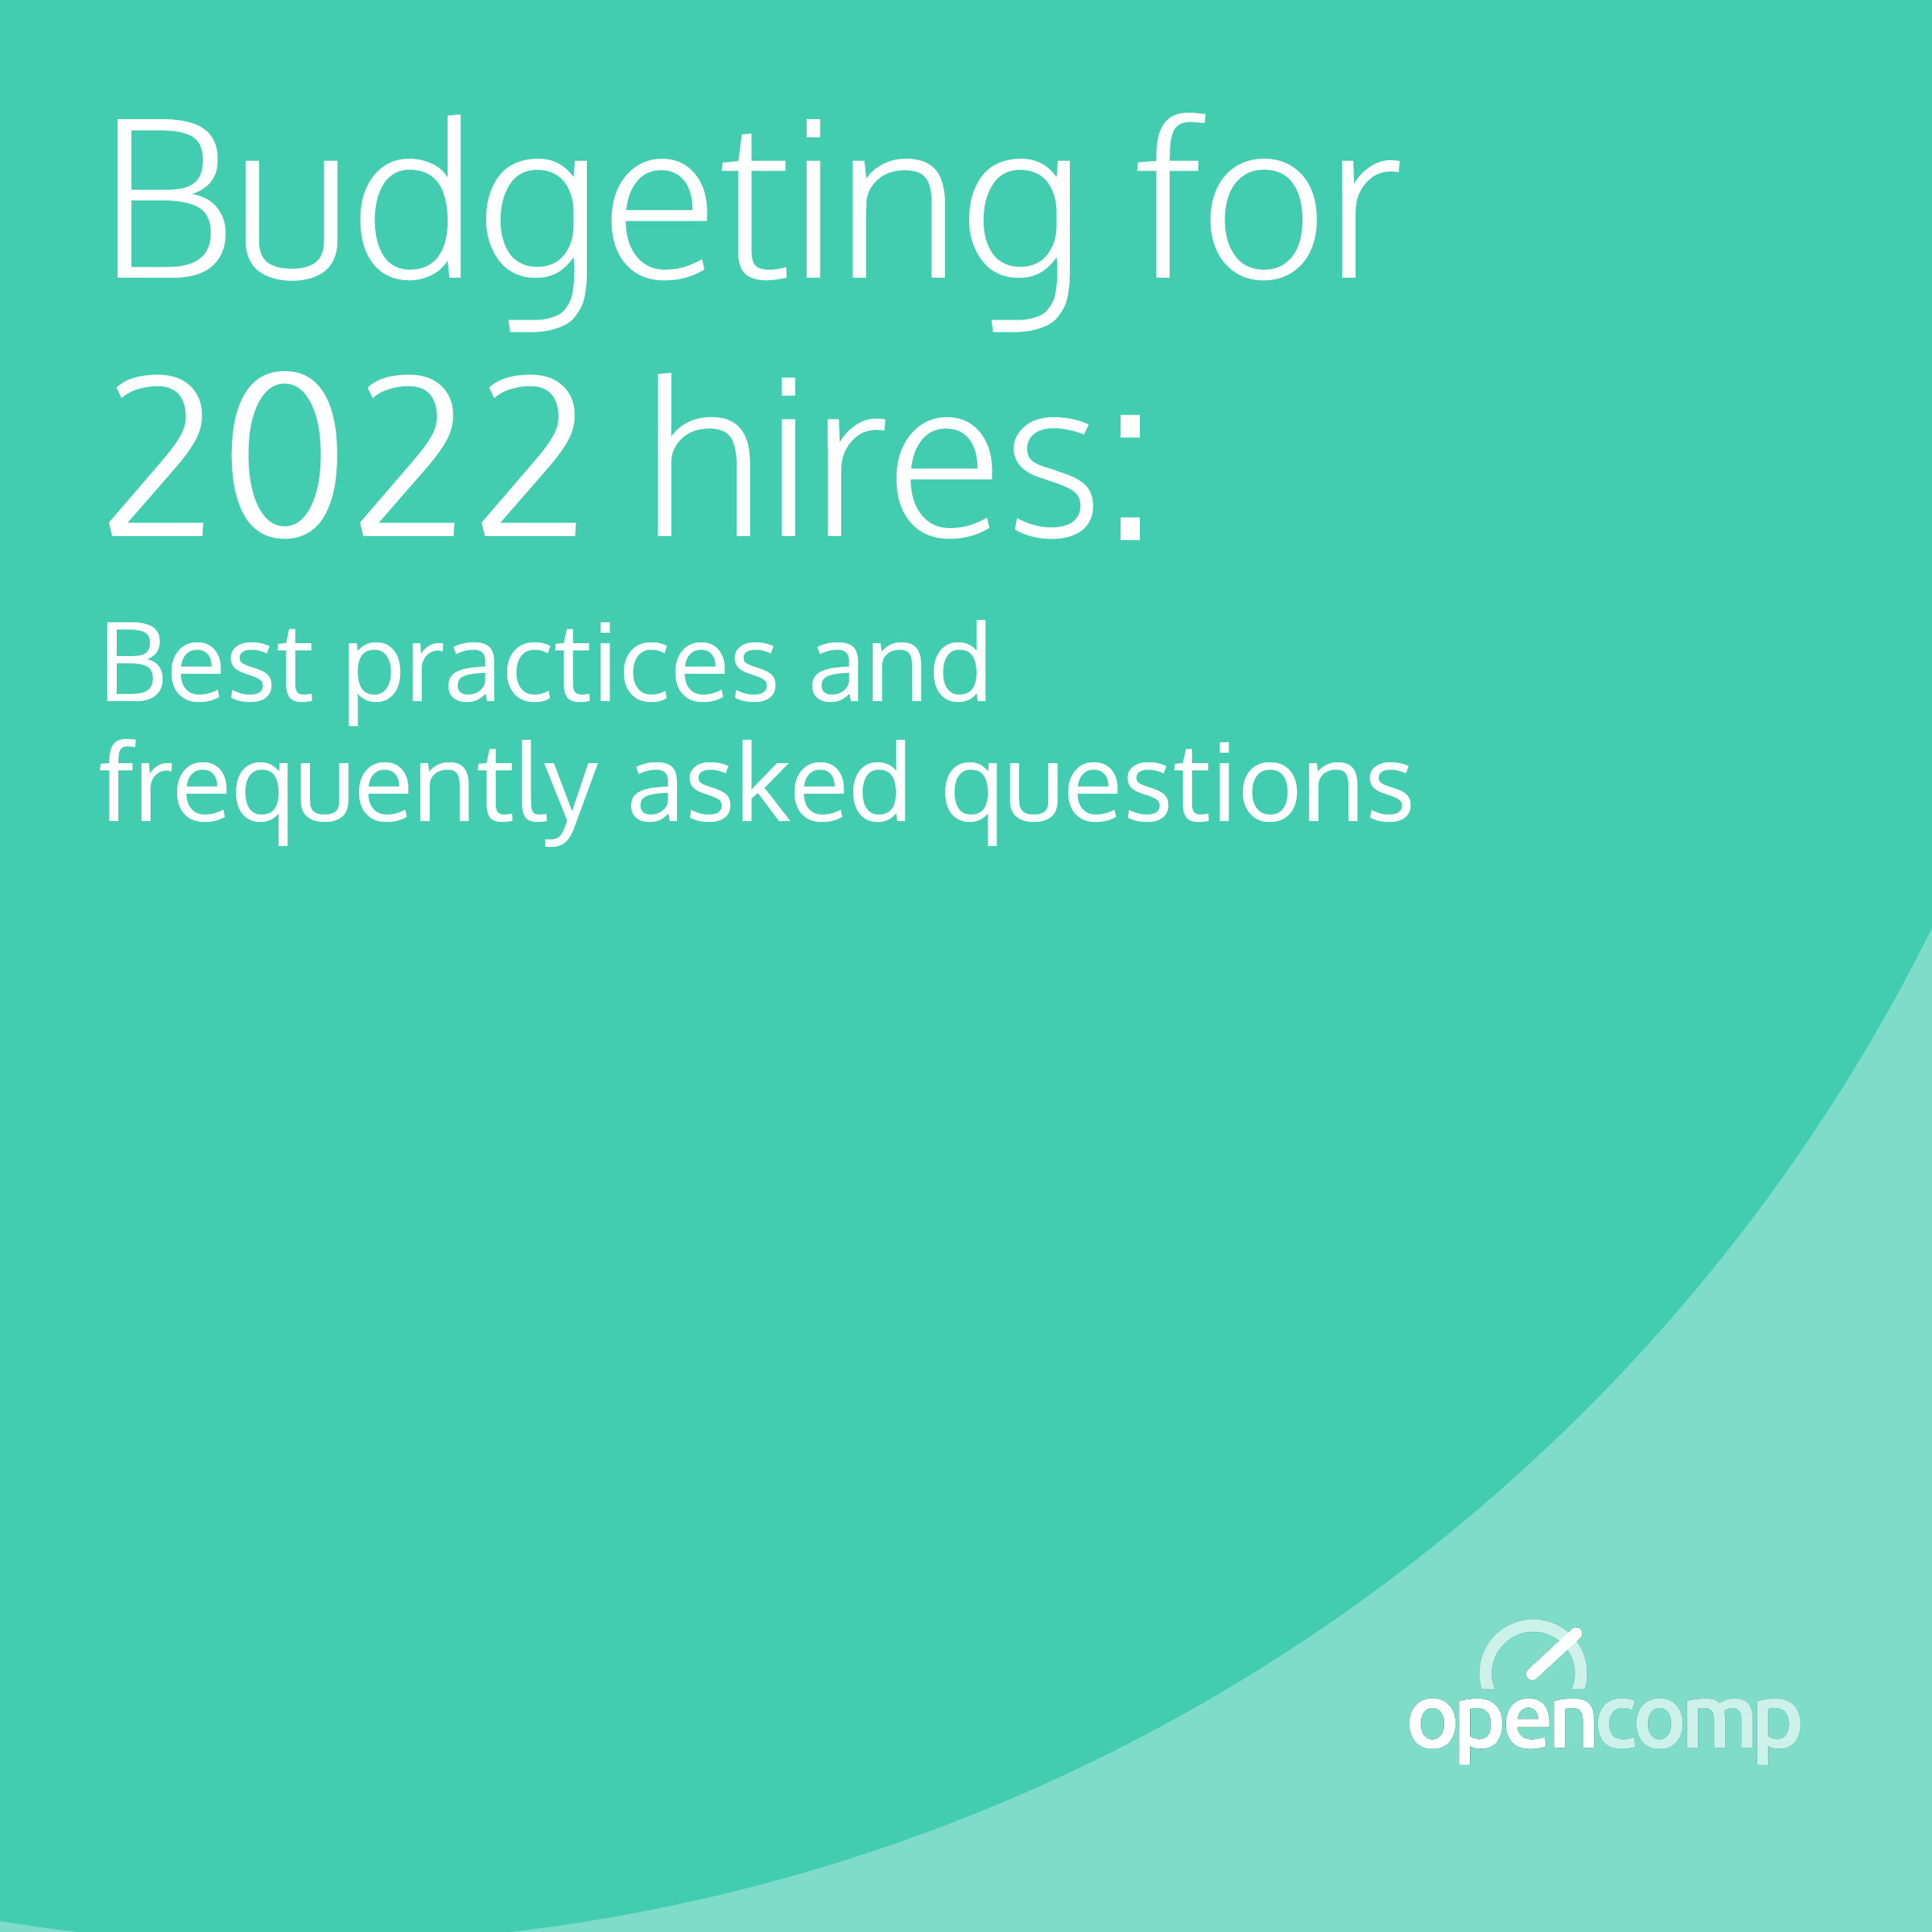 Budgeting for 2022 Hires: Best Practices and FAQs for Series B Startup Salaries & More